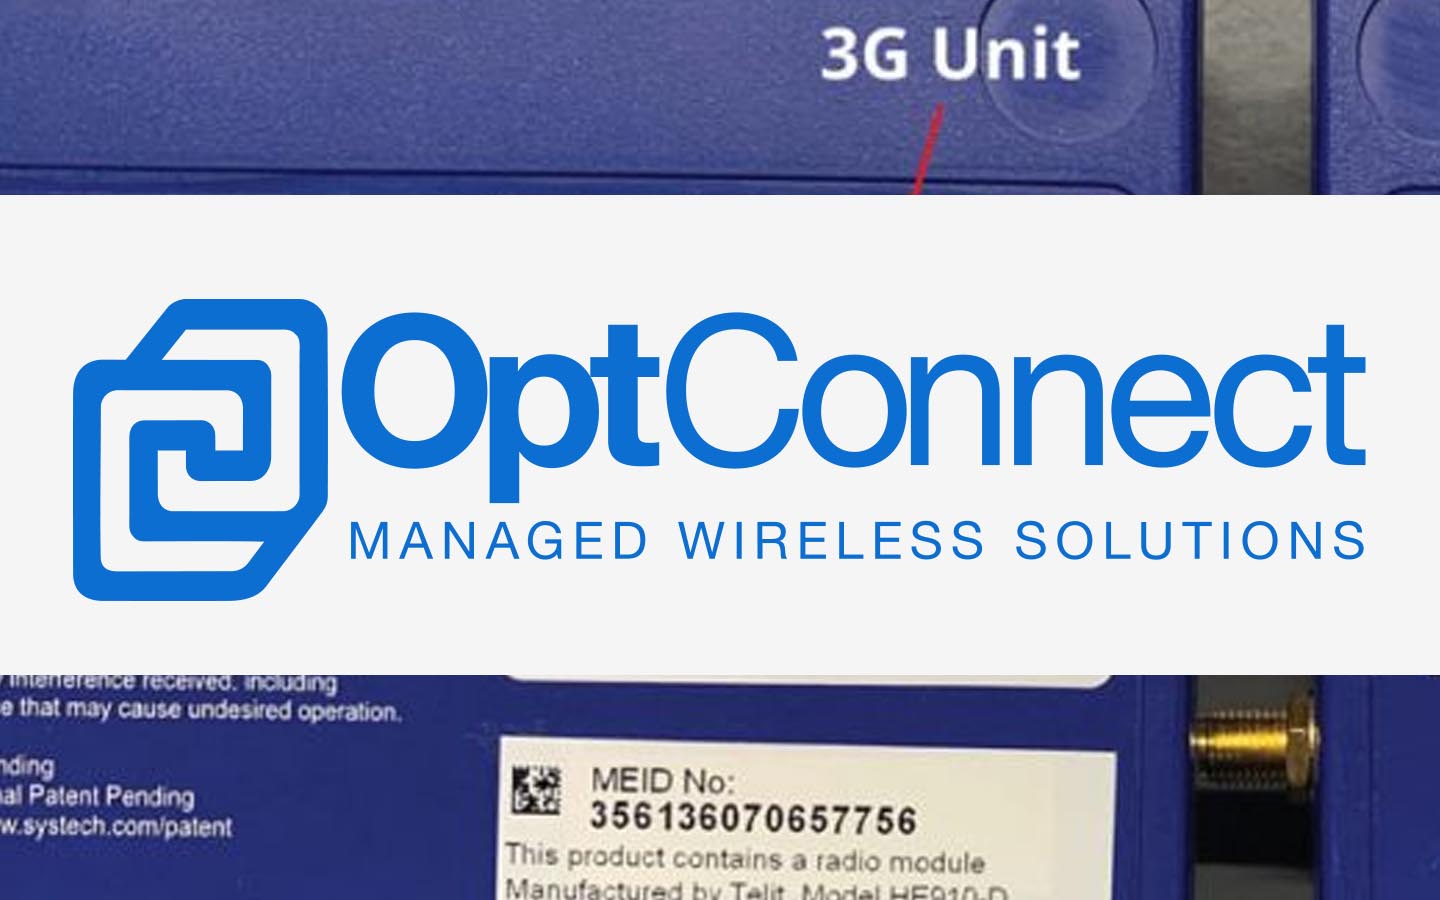 OptConnect 2G:3G